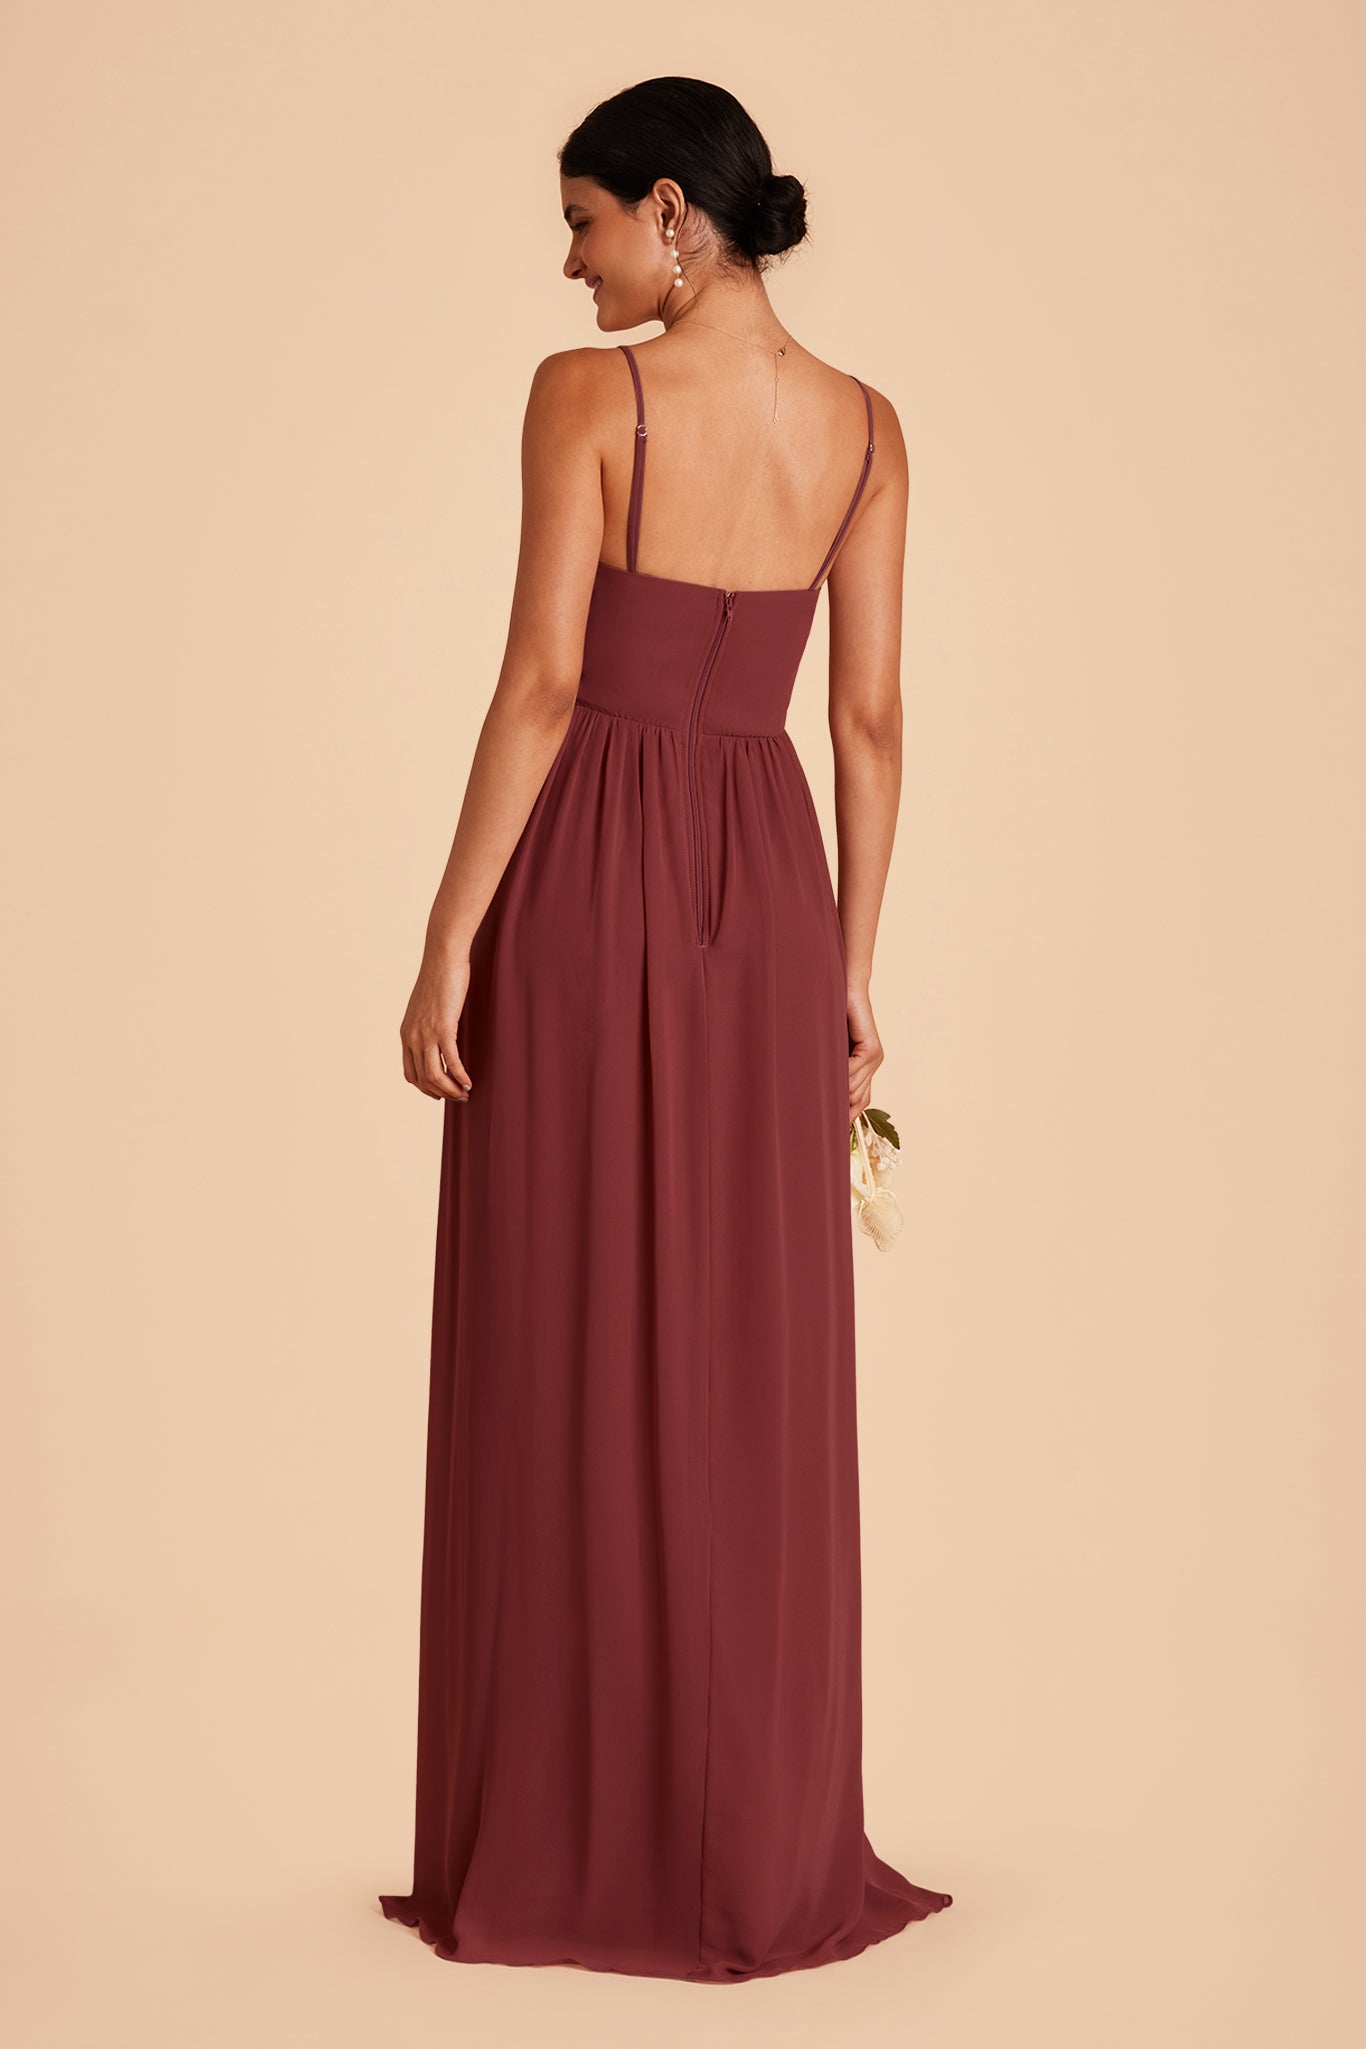 August bridesmaid dress with slit in rosewood chiffon by Birdy Grey, back view